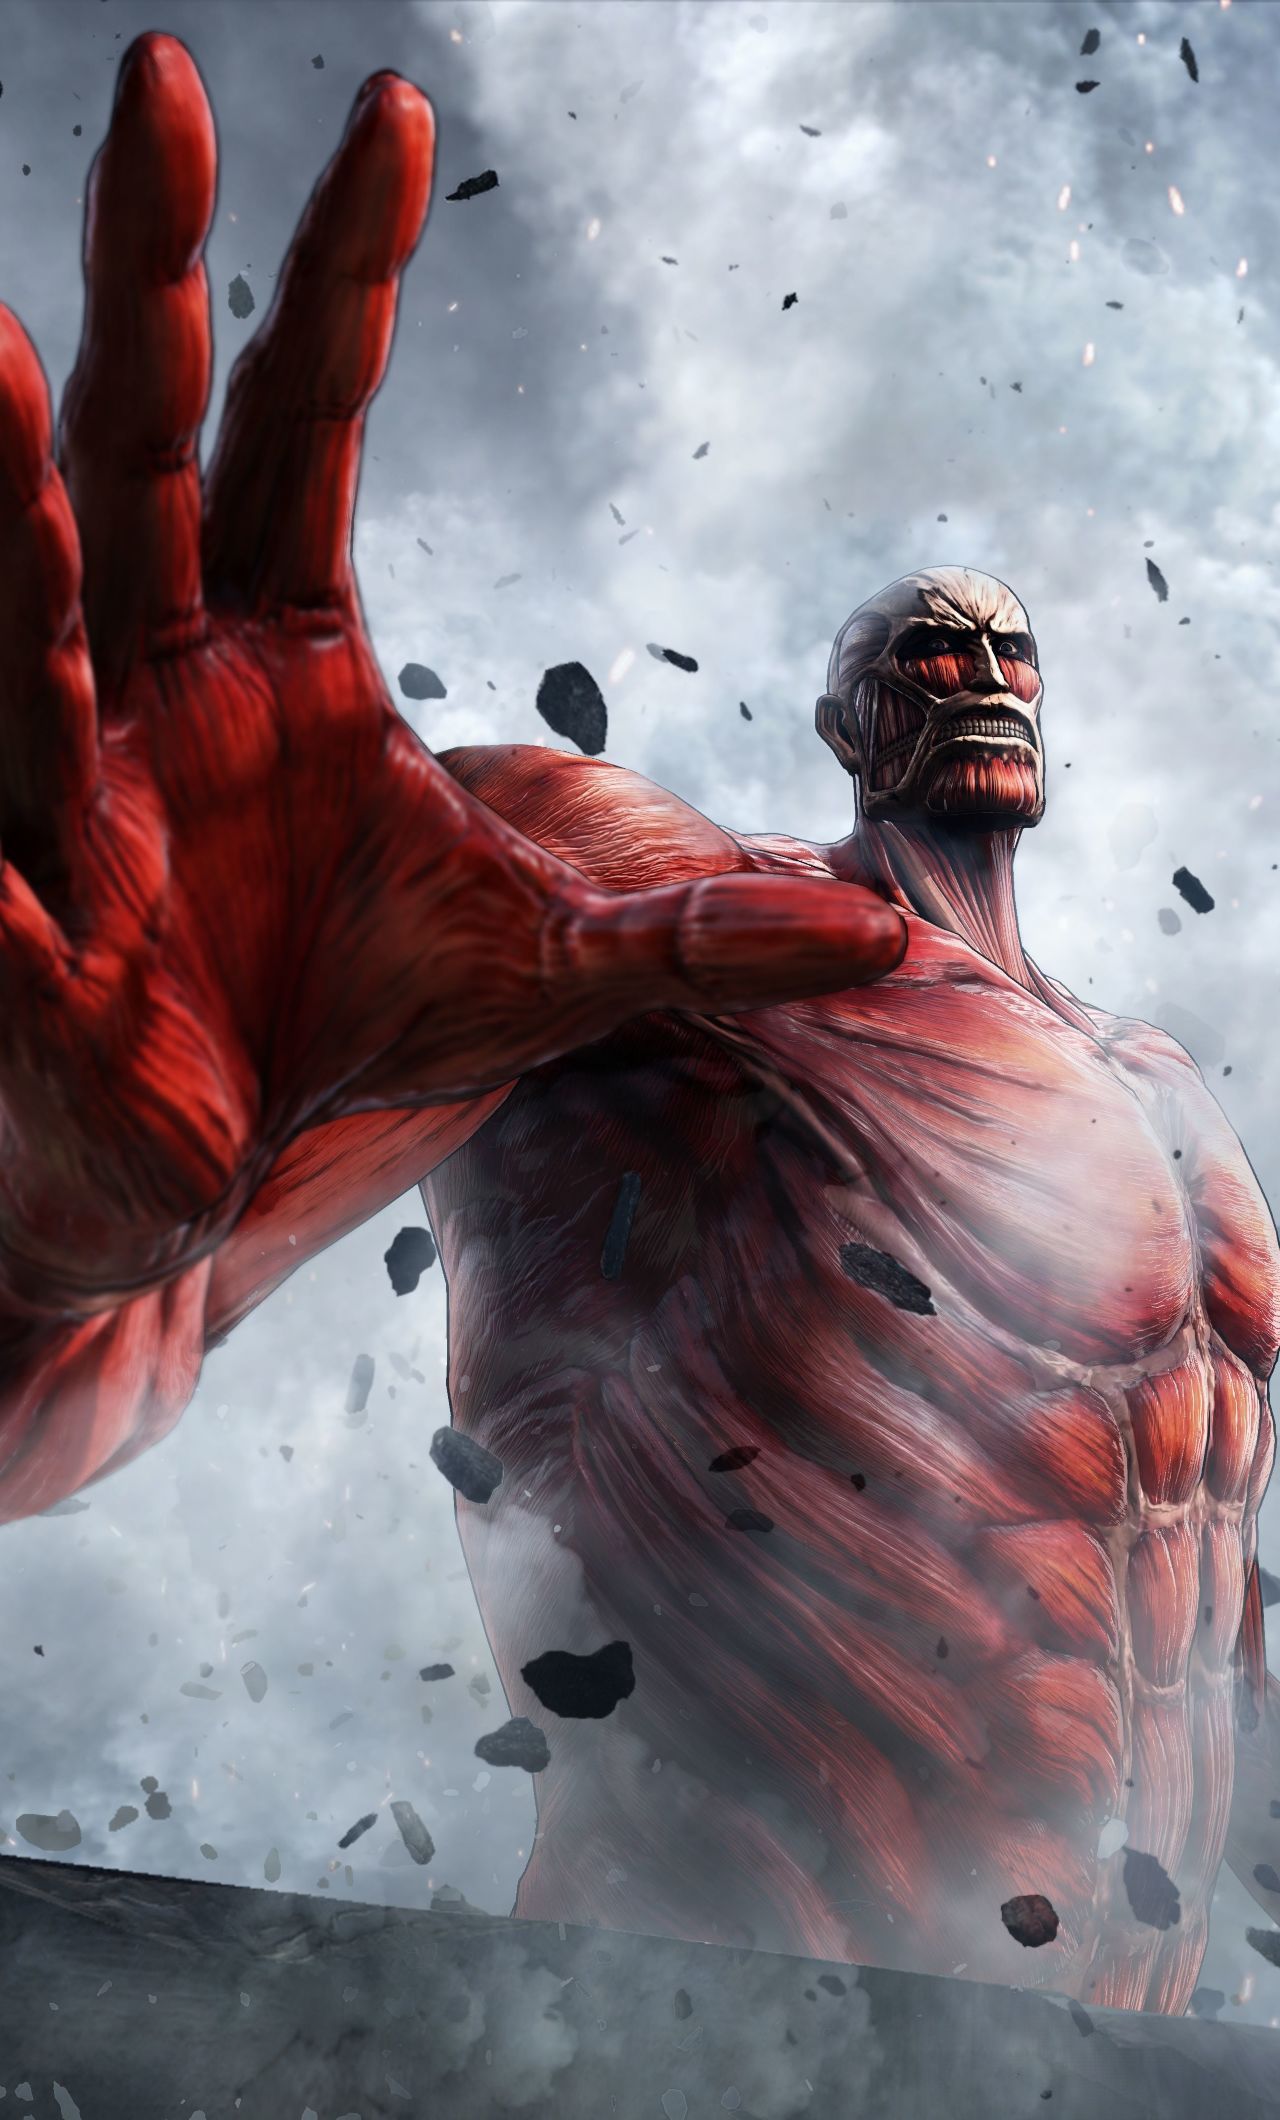 Attack on Titan 2 Colossal Titan iPhone 6 plus Wallpaper, HD Games 4K Wallpaper, Image, Photo and Background